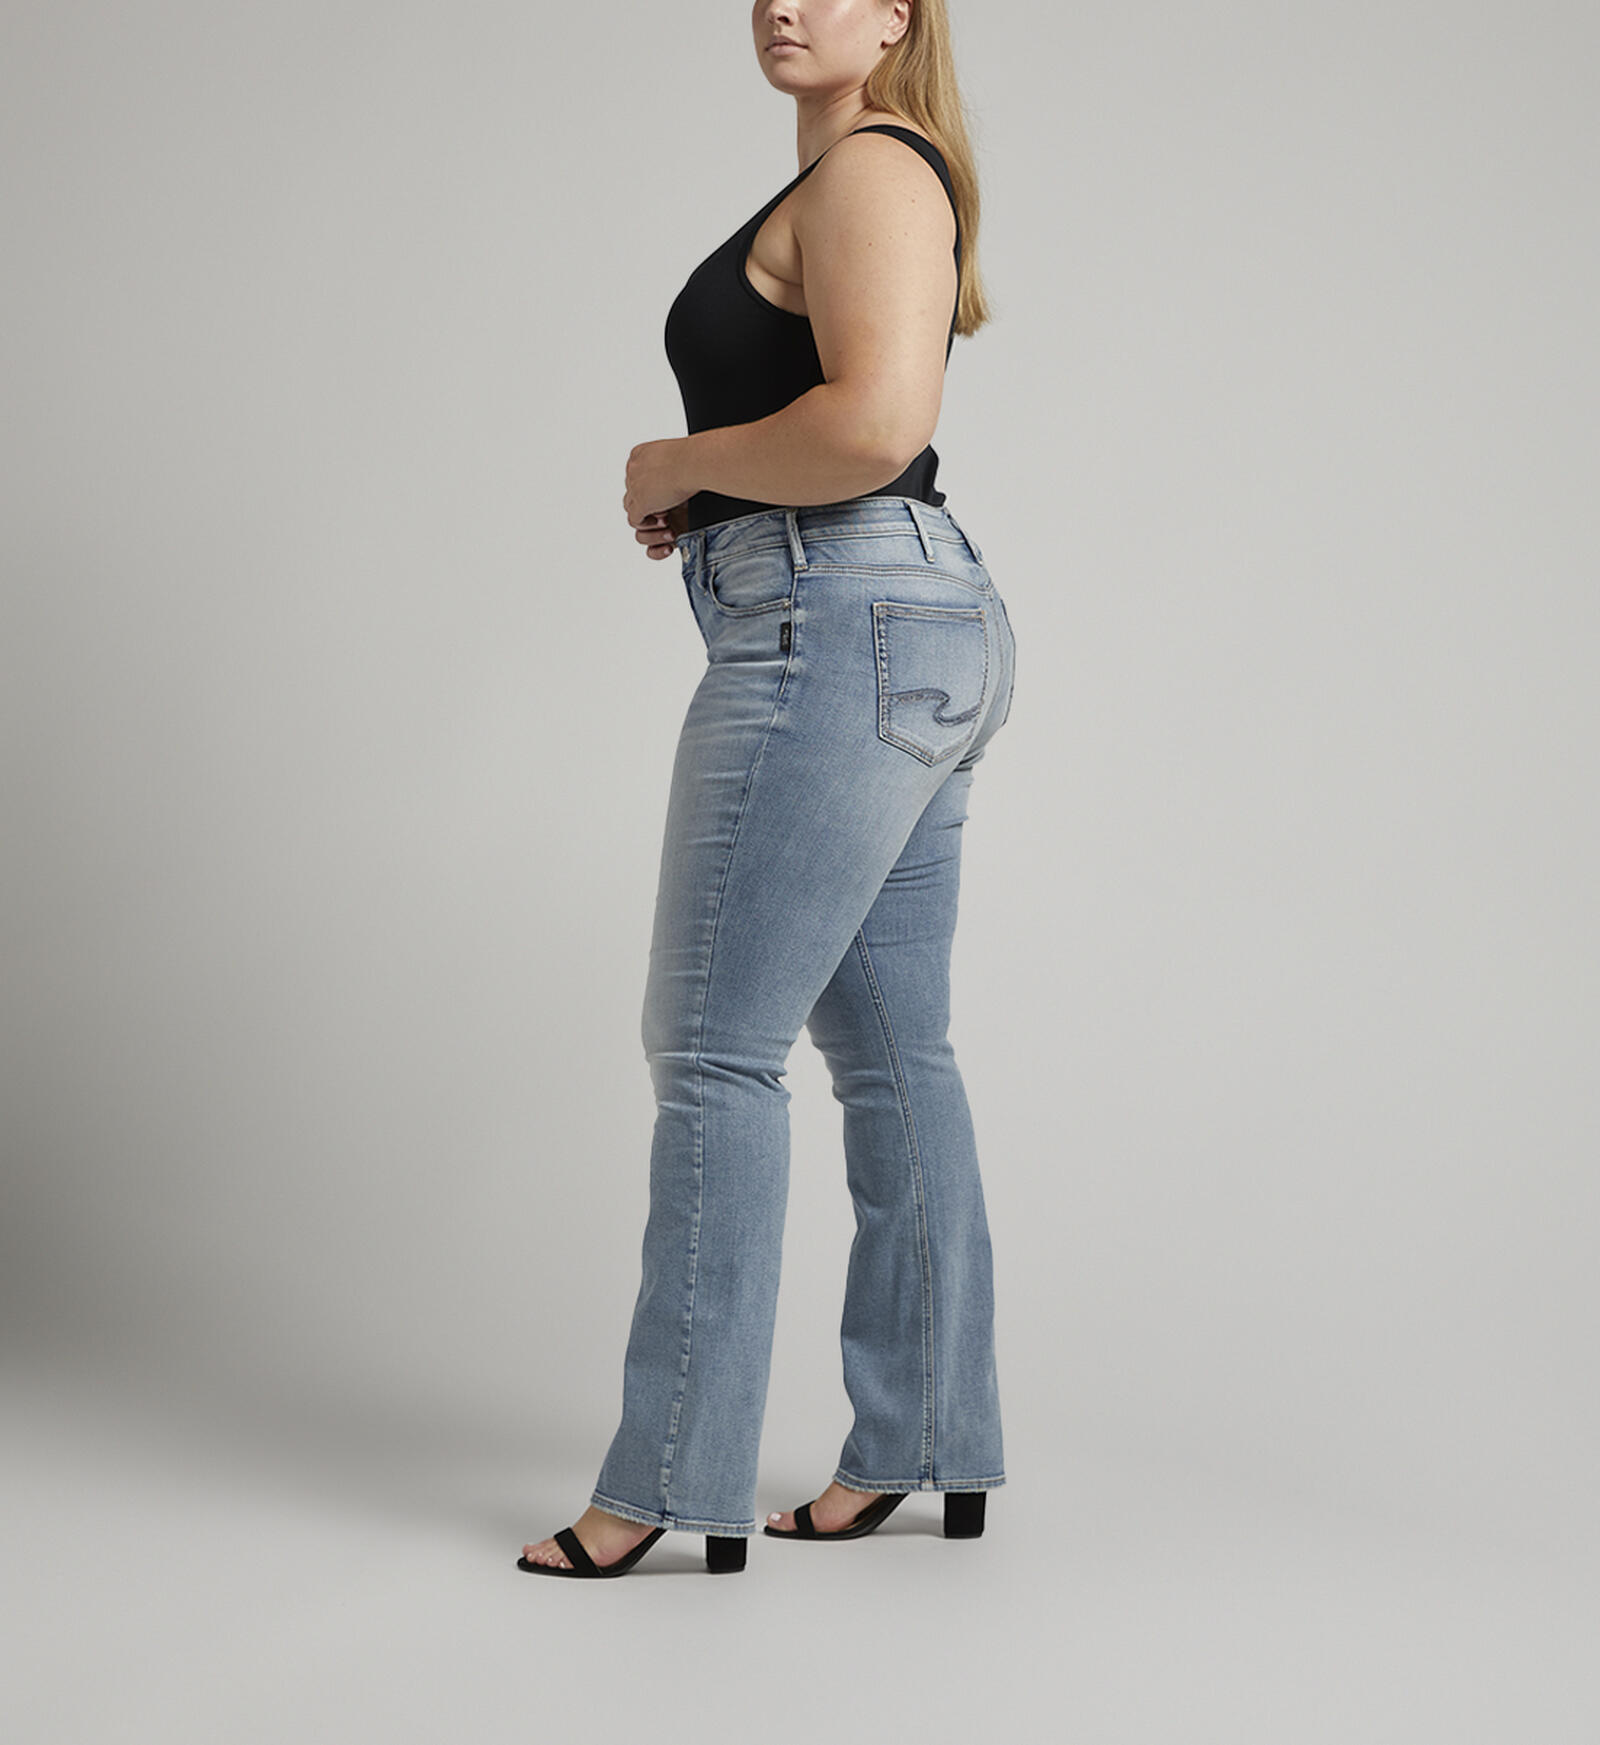 Buy Suki Mid Rise Slim Bootcut Jeans Plus Size for USD 70.00